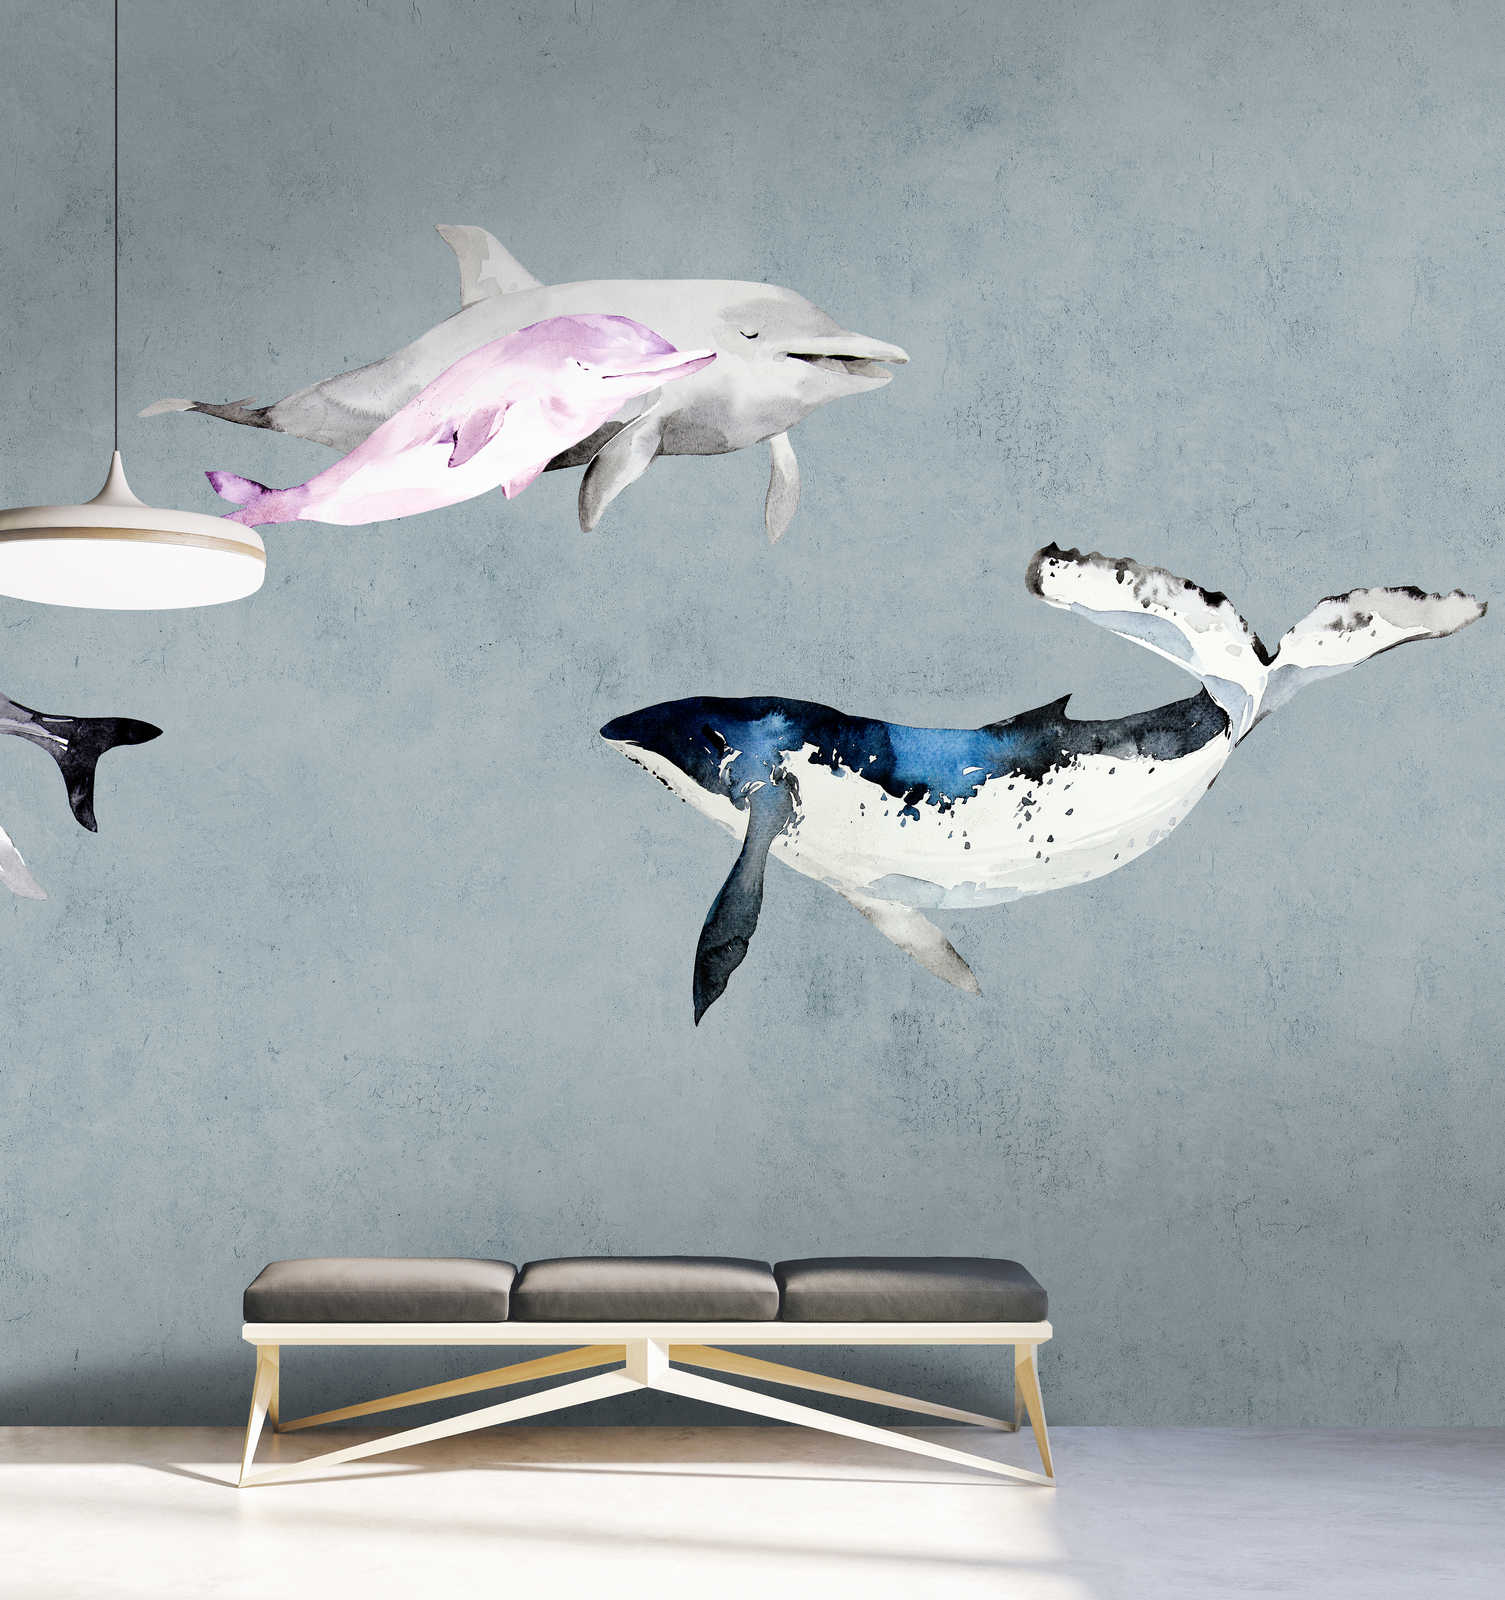             Oceans Five 1 - Watercolour style whales & dolphins mural
        